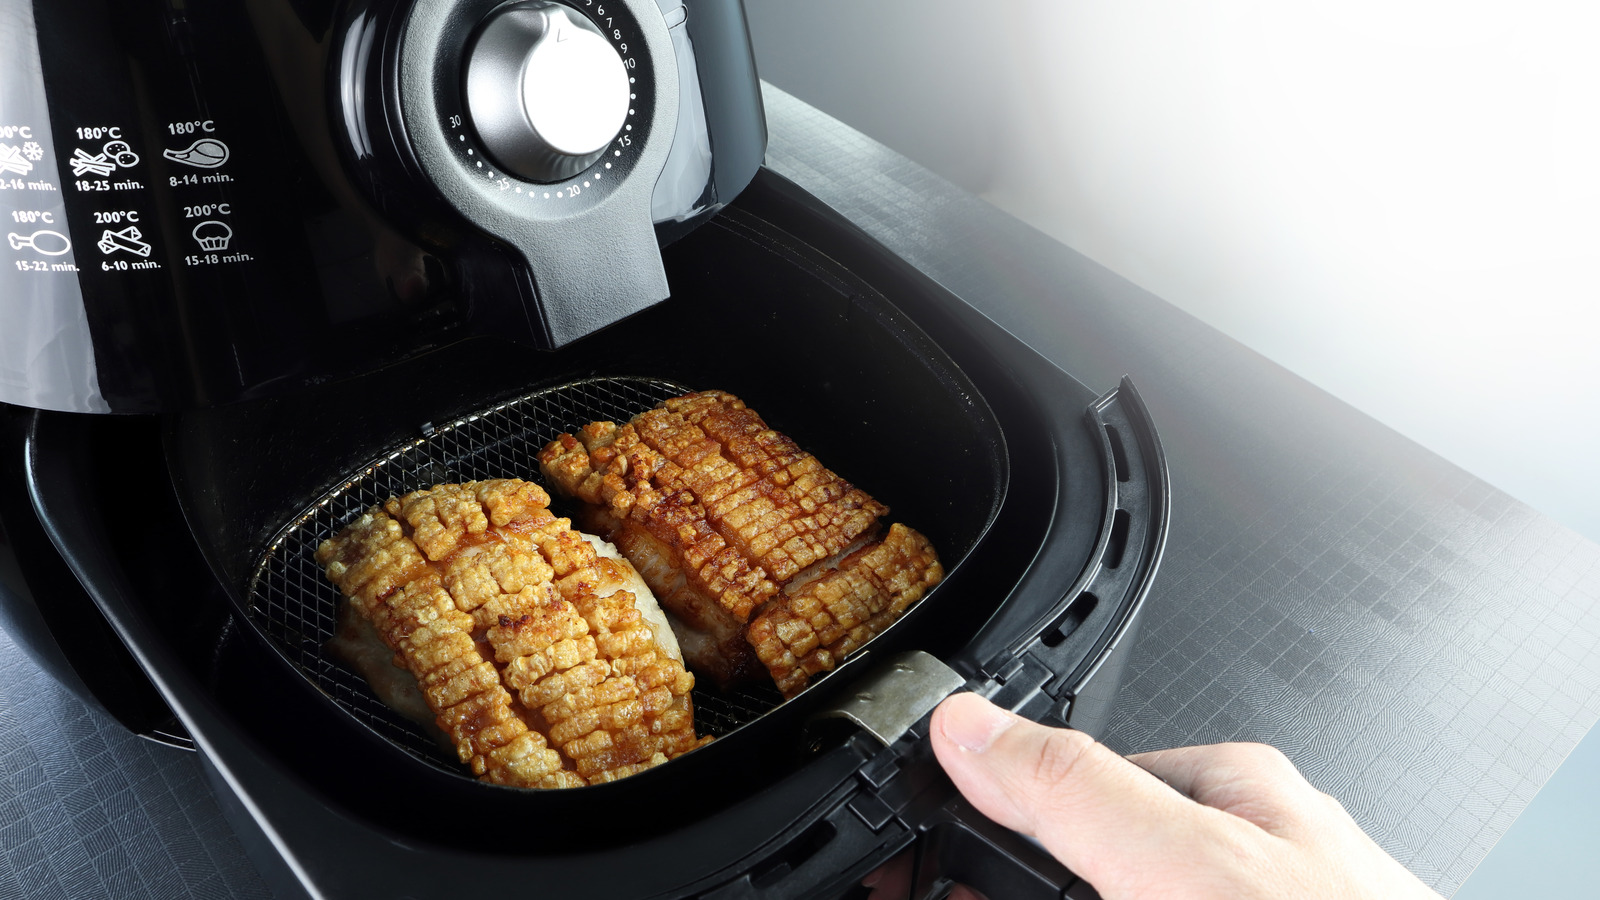 Best and Worst Things to Make in an Air Fryer, According to Experts